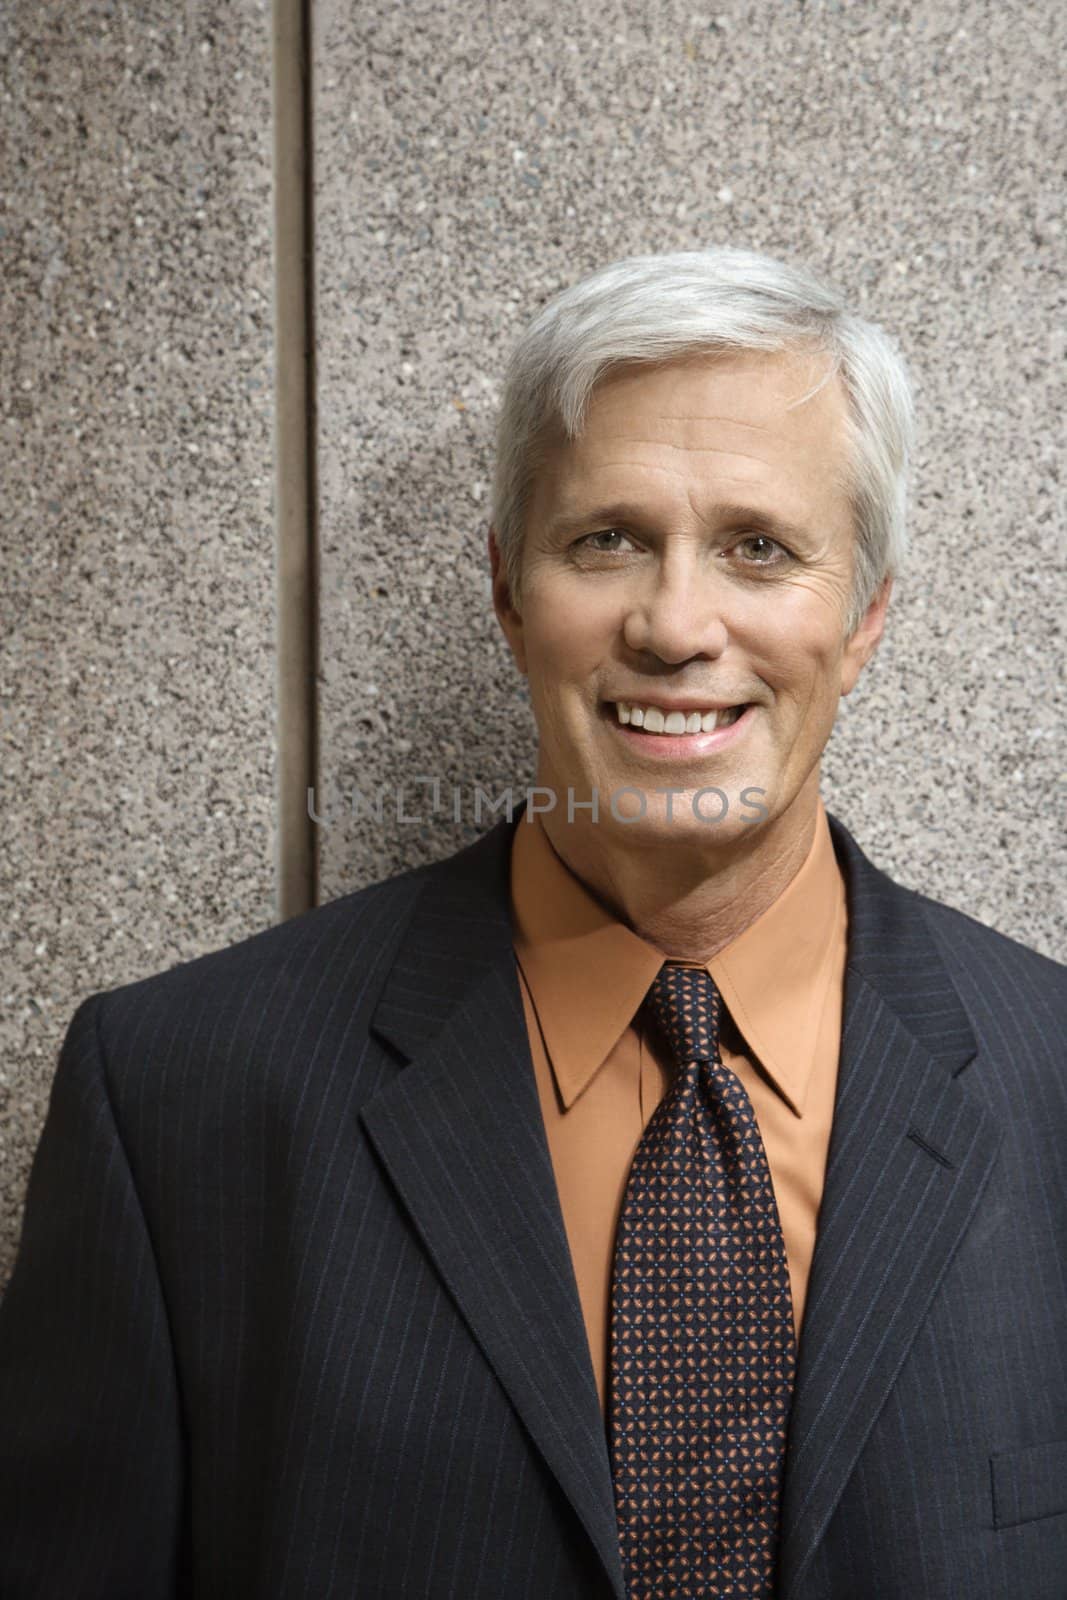 Caucasian middle aged businessman smiling at viewer.